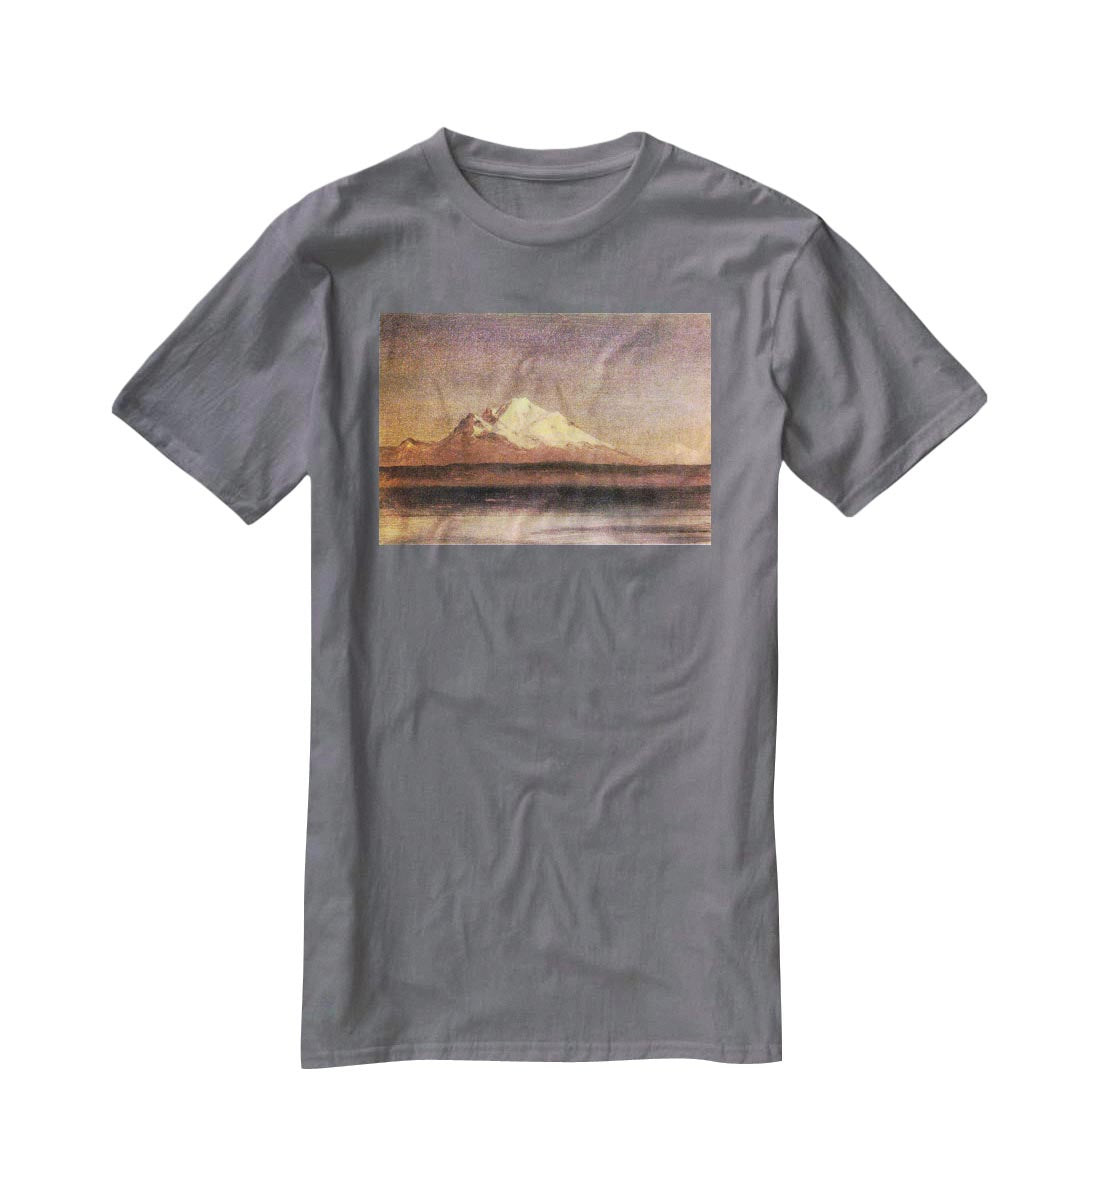 Snowy Mountains in the Pacific Northwest 2 by Bierstadt T-Shirt - Canvas Art Rocks - 3